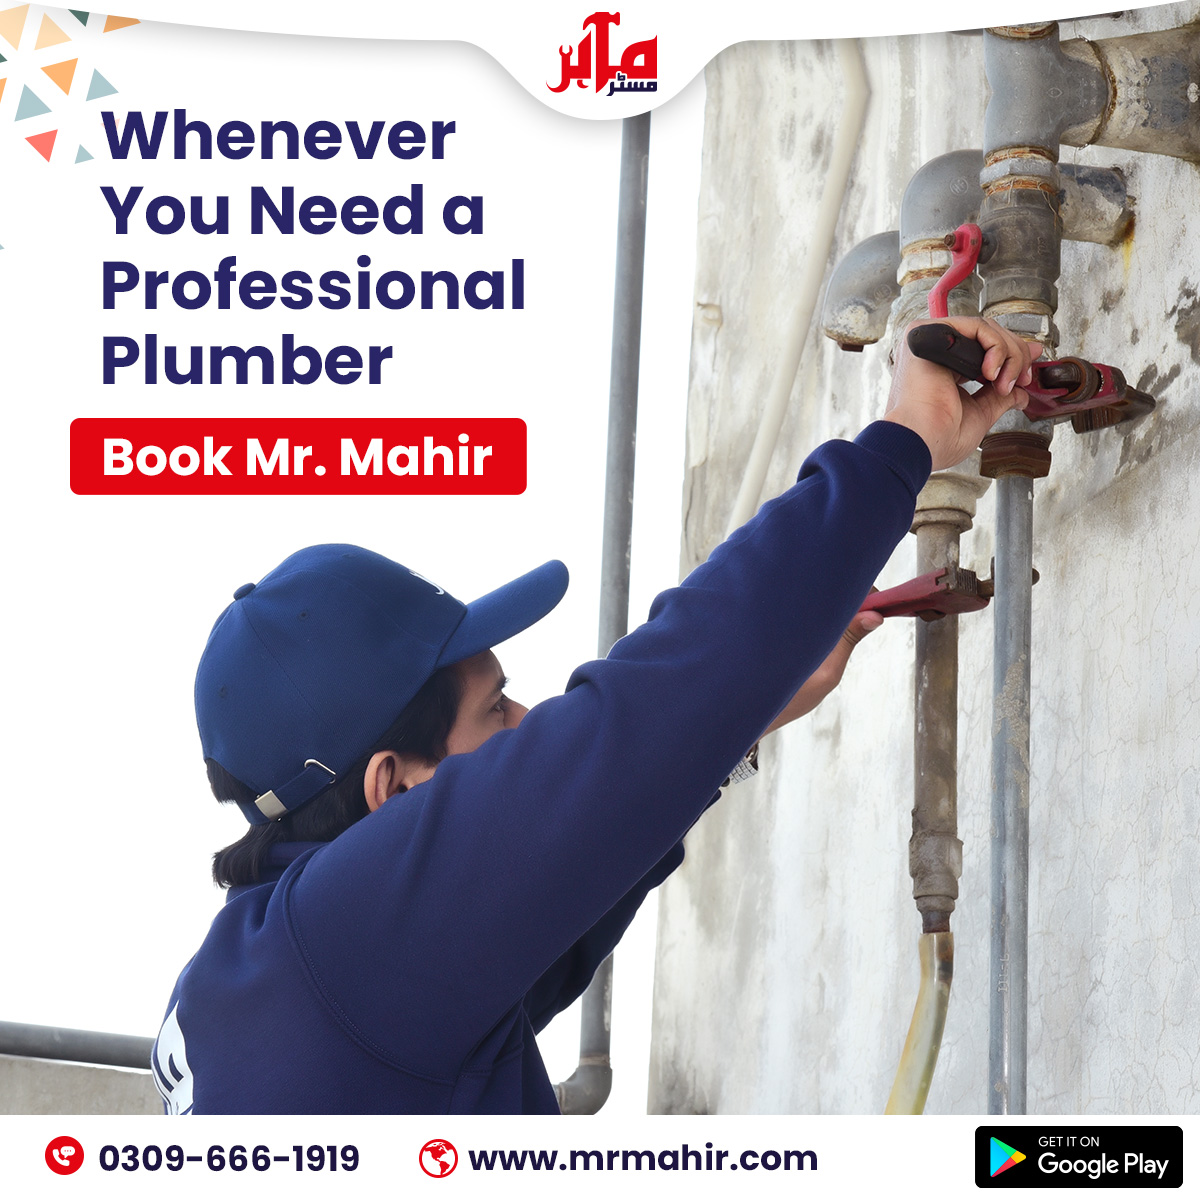 5 Signs Your Home Needs a Professional Plumber